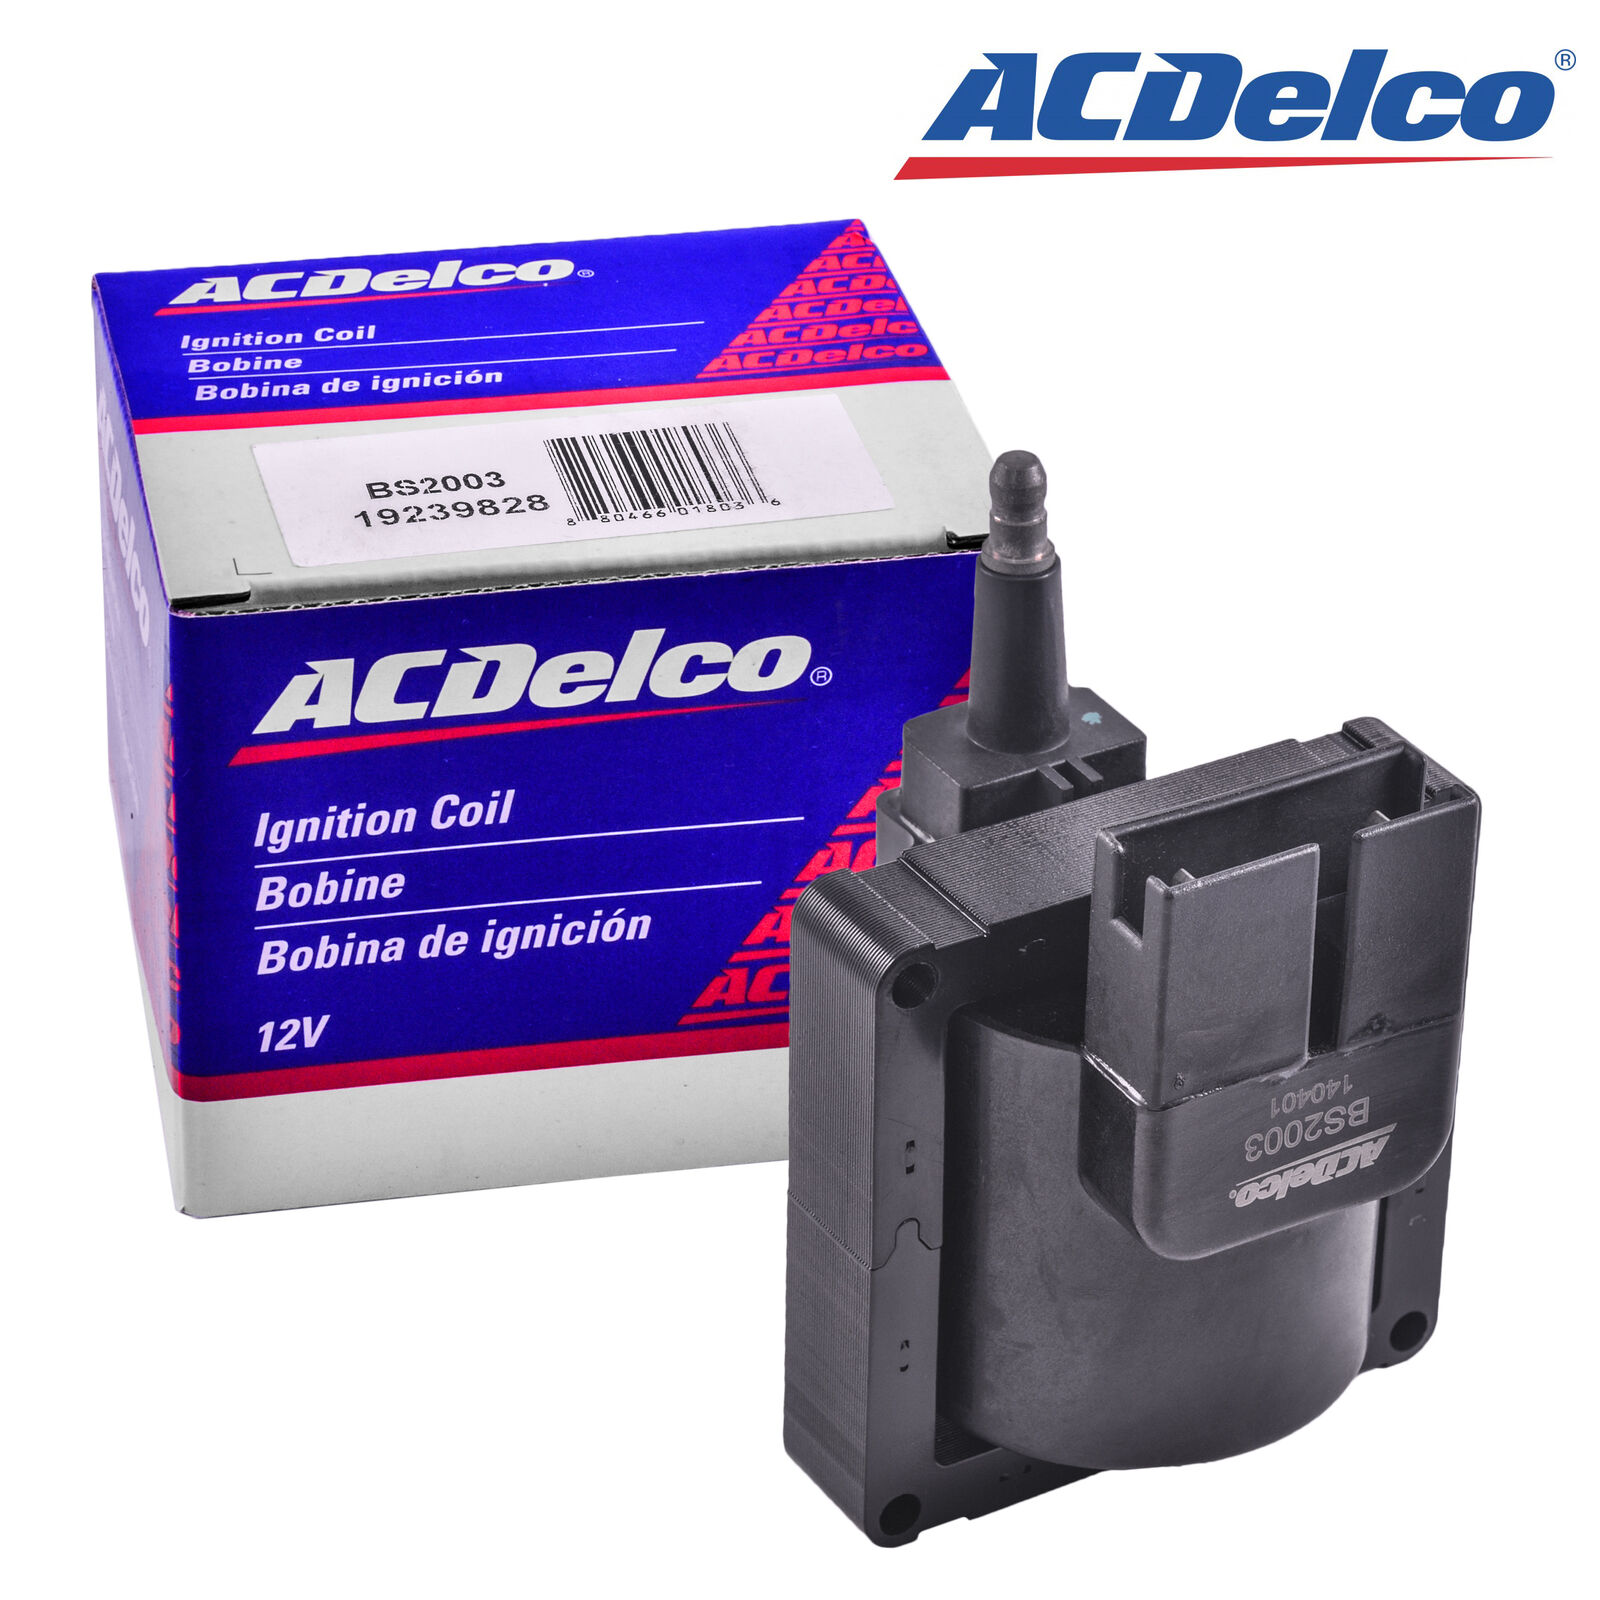 ACDelco BS-2003 High Performance Ignition Coil For Ford 83-97